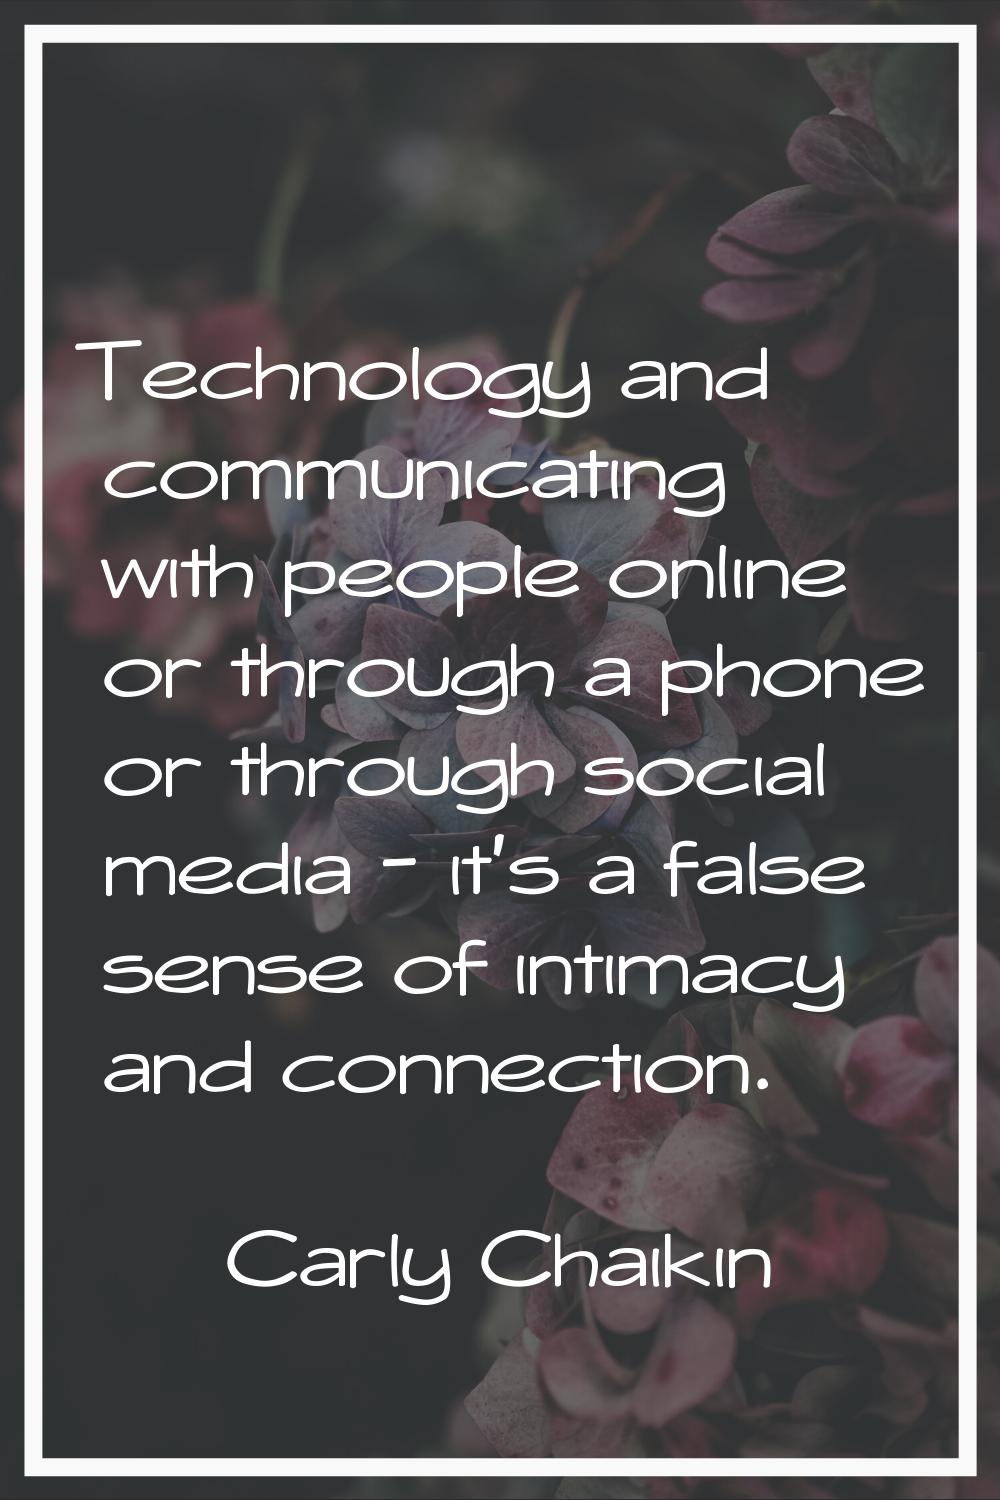 Technology and communicating with people online or through a phone or through social media - it's a